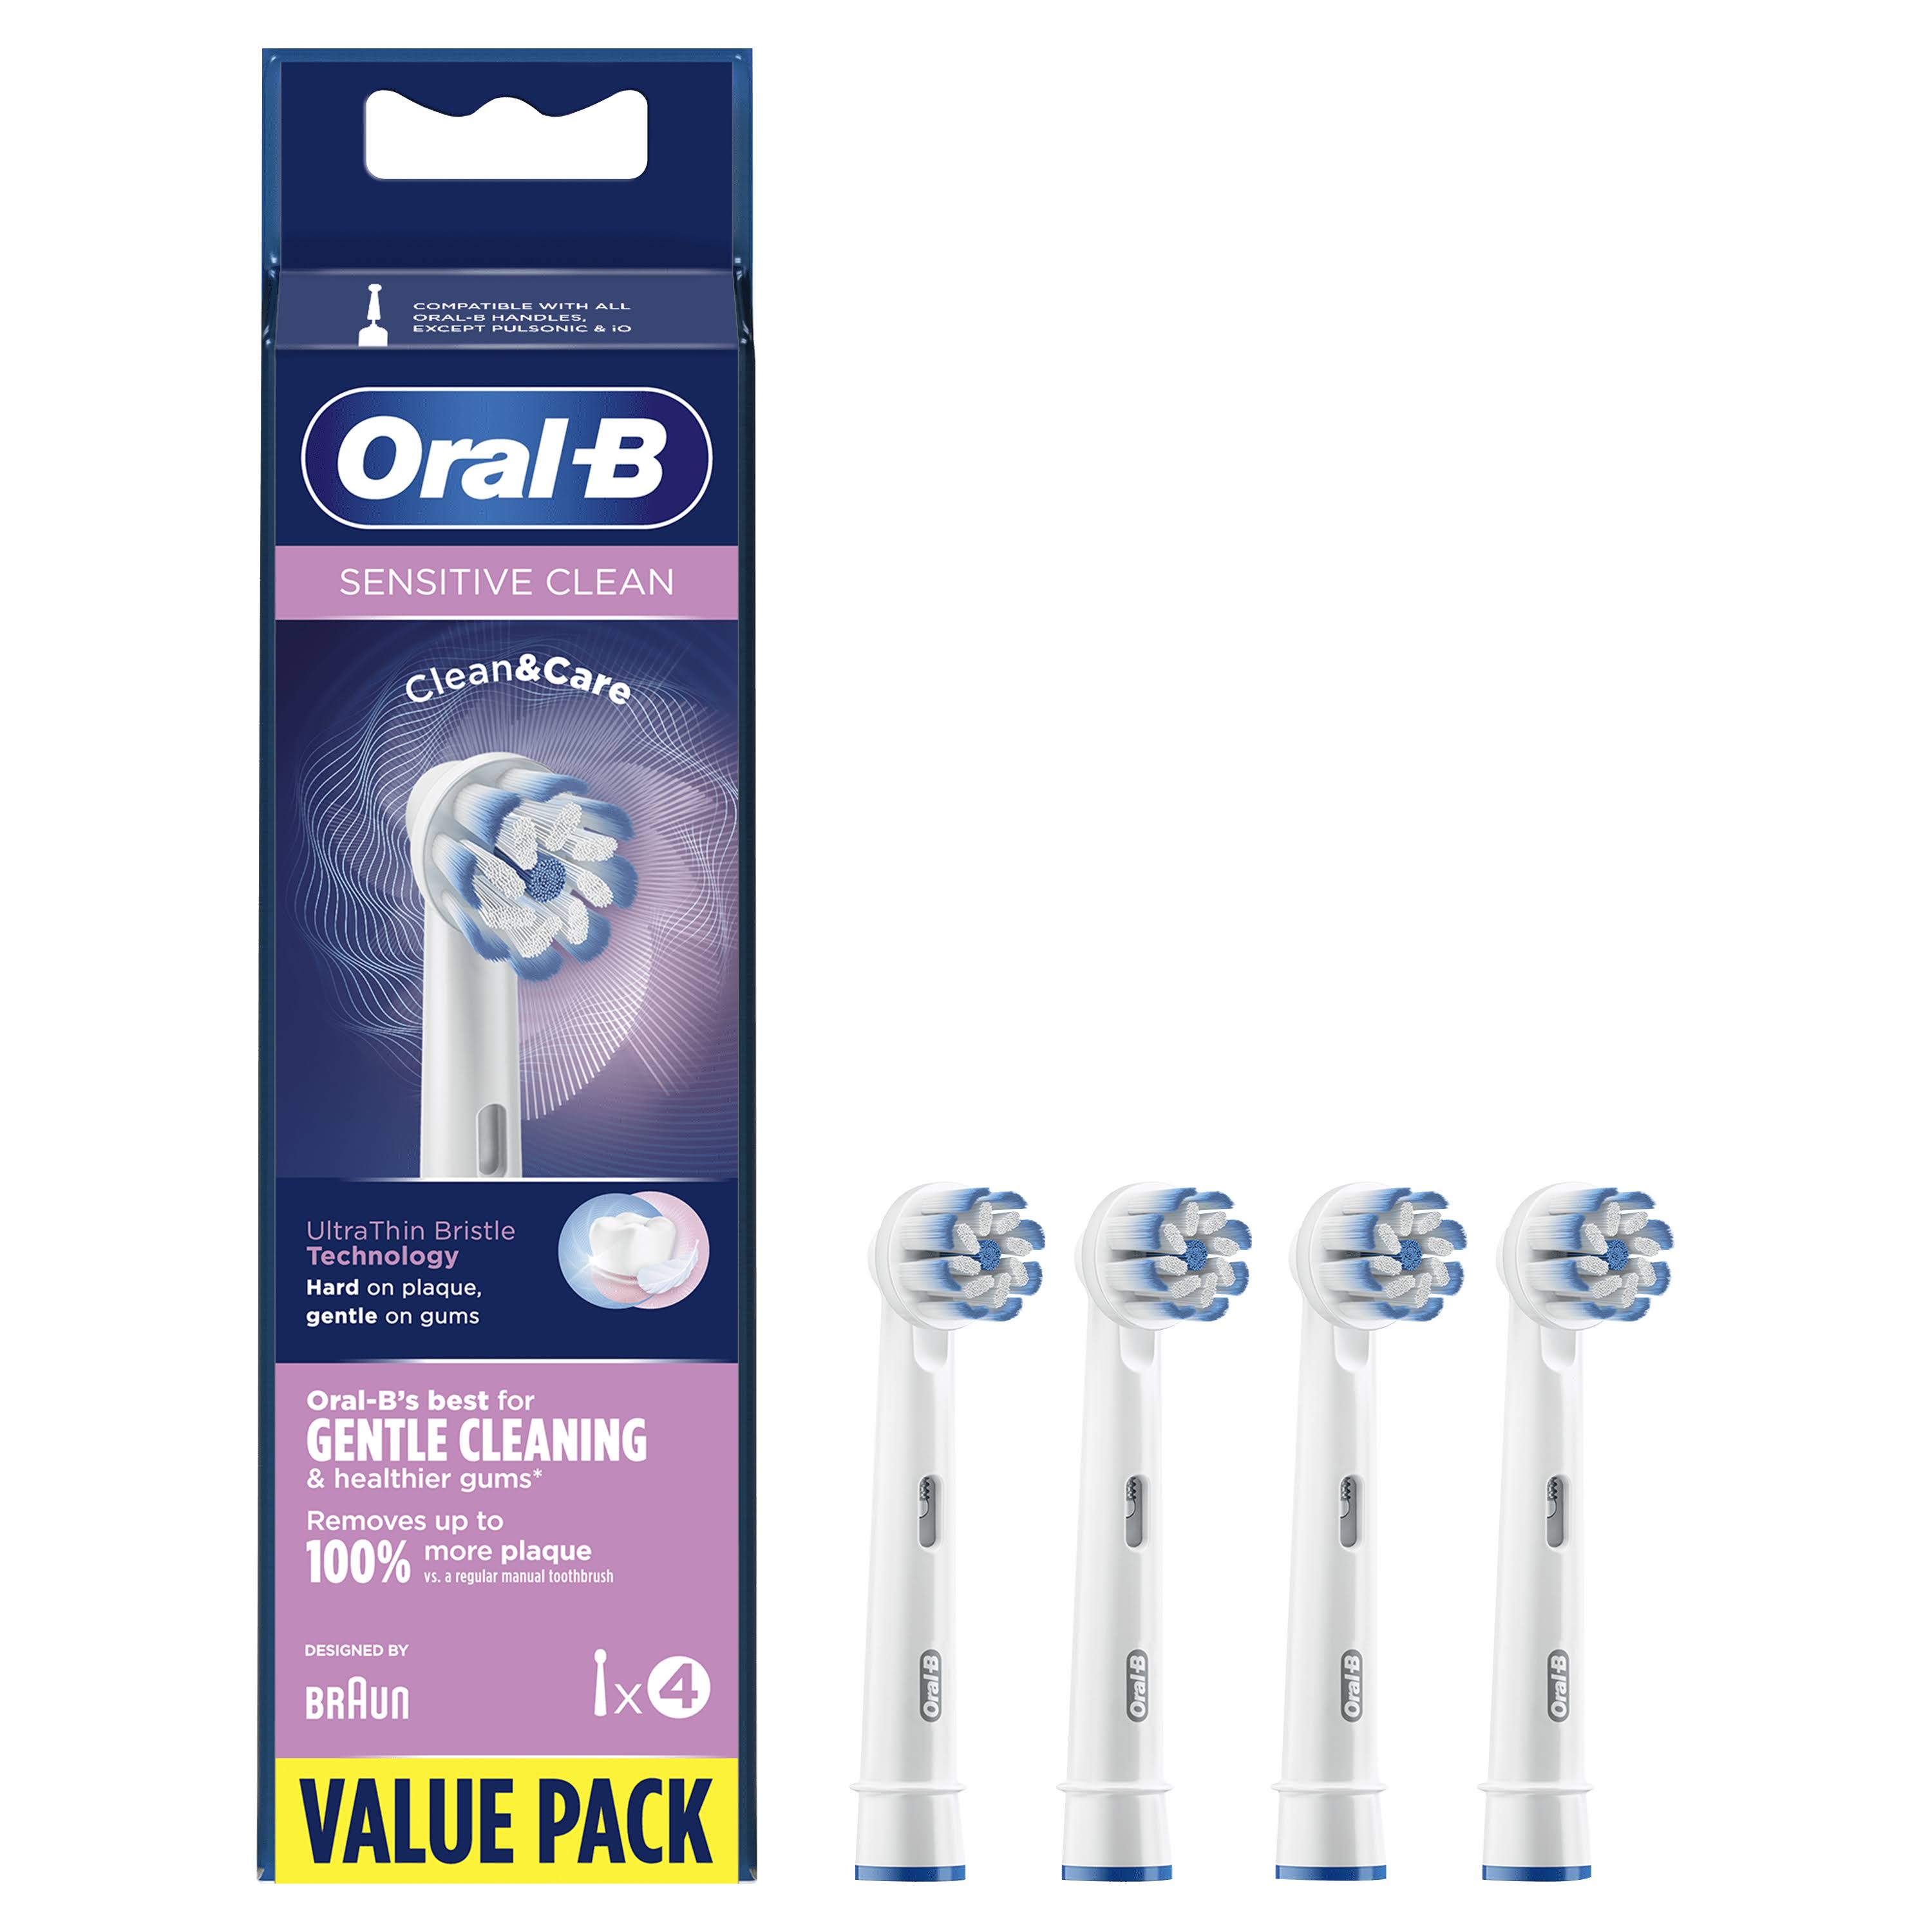 Oral-B Sensitive Clean Toothbrush Heads - 4 Pack